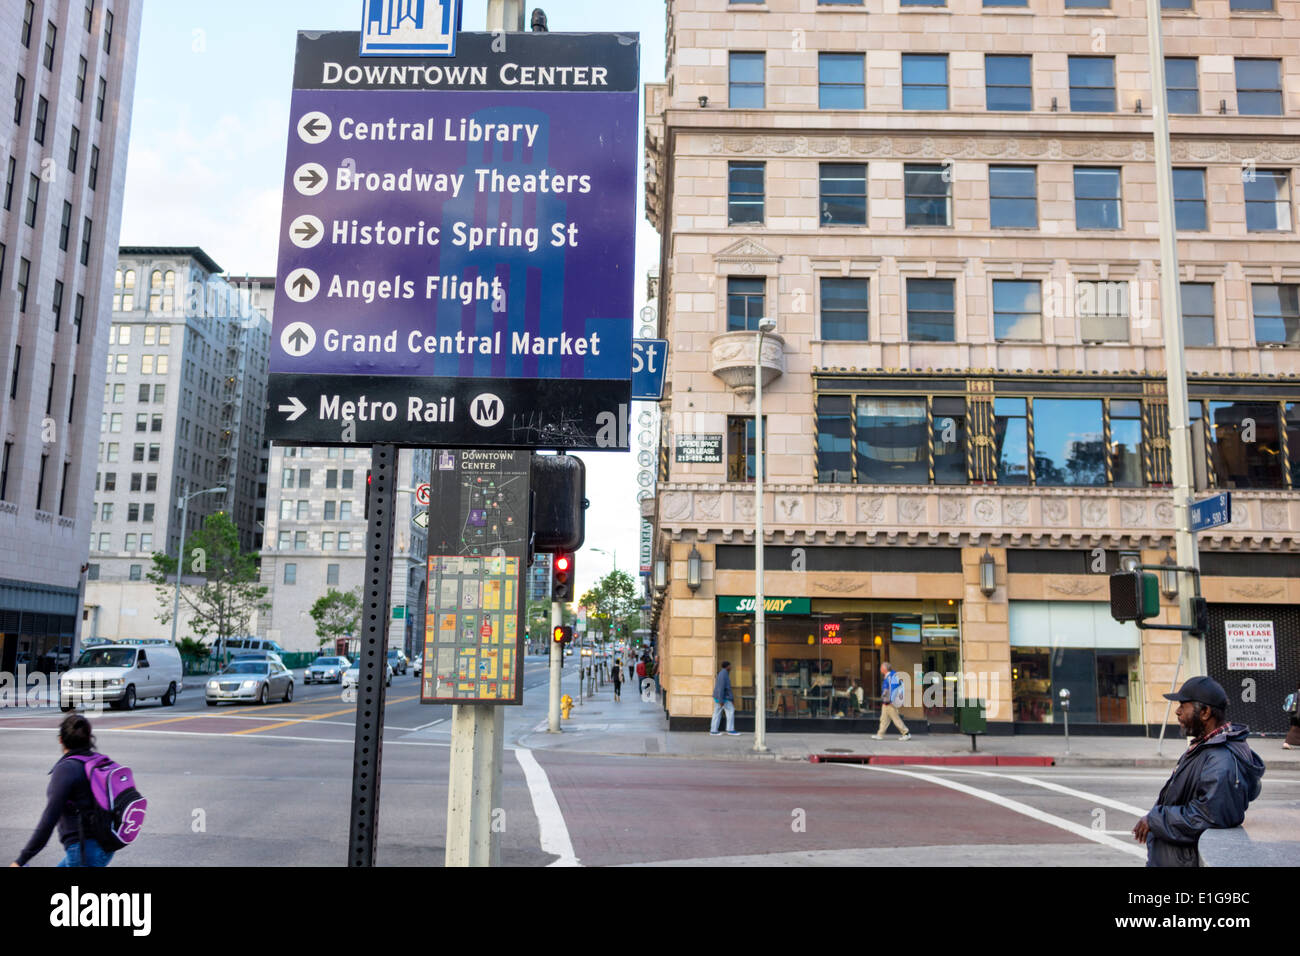 Los Angeles California,Downtown Center,central business,district,street scene,intersection,corner,sign,direction historic sites,Black man men male,inf Stock Photo